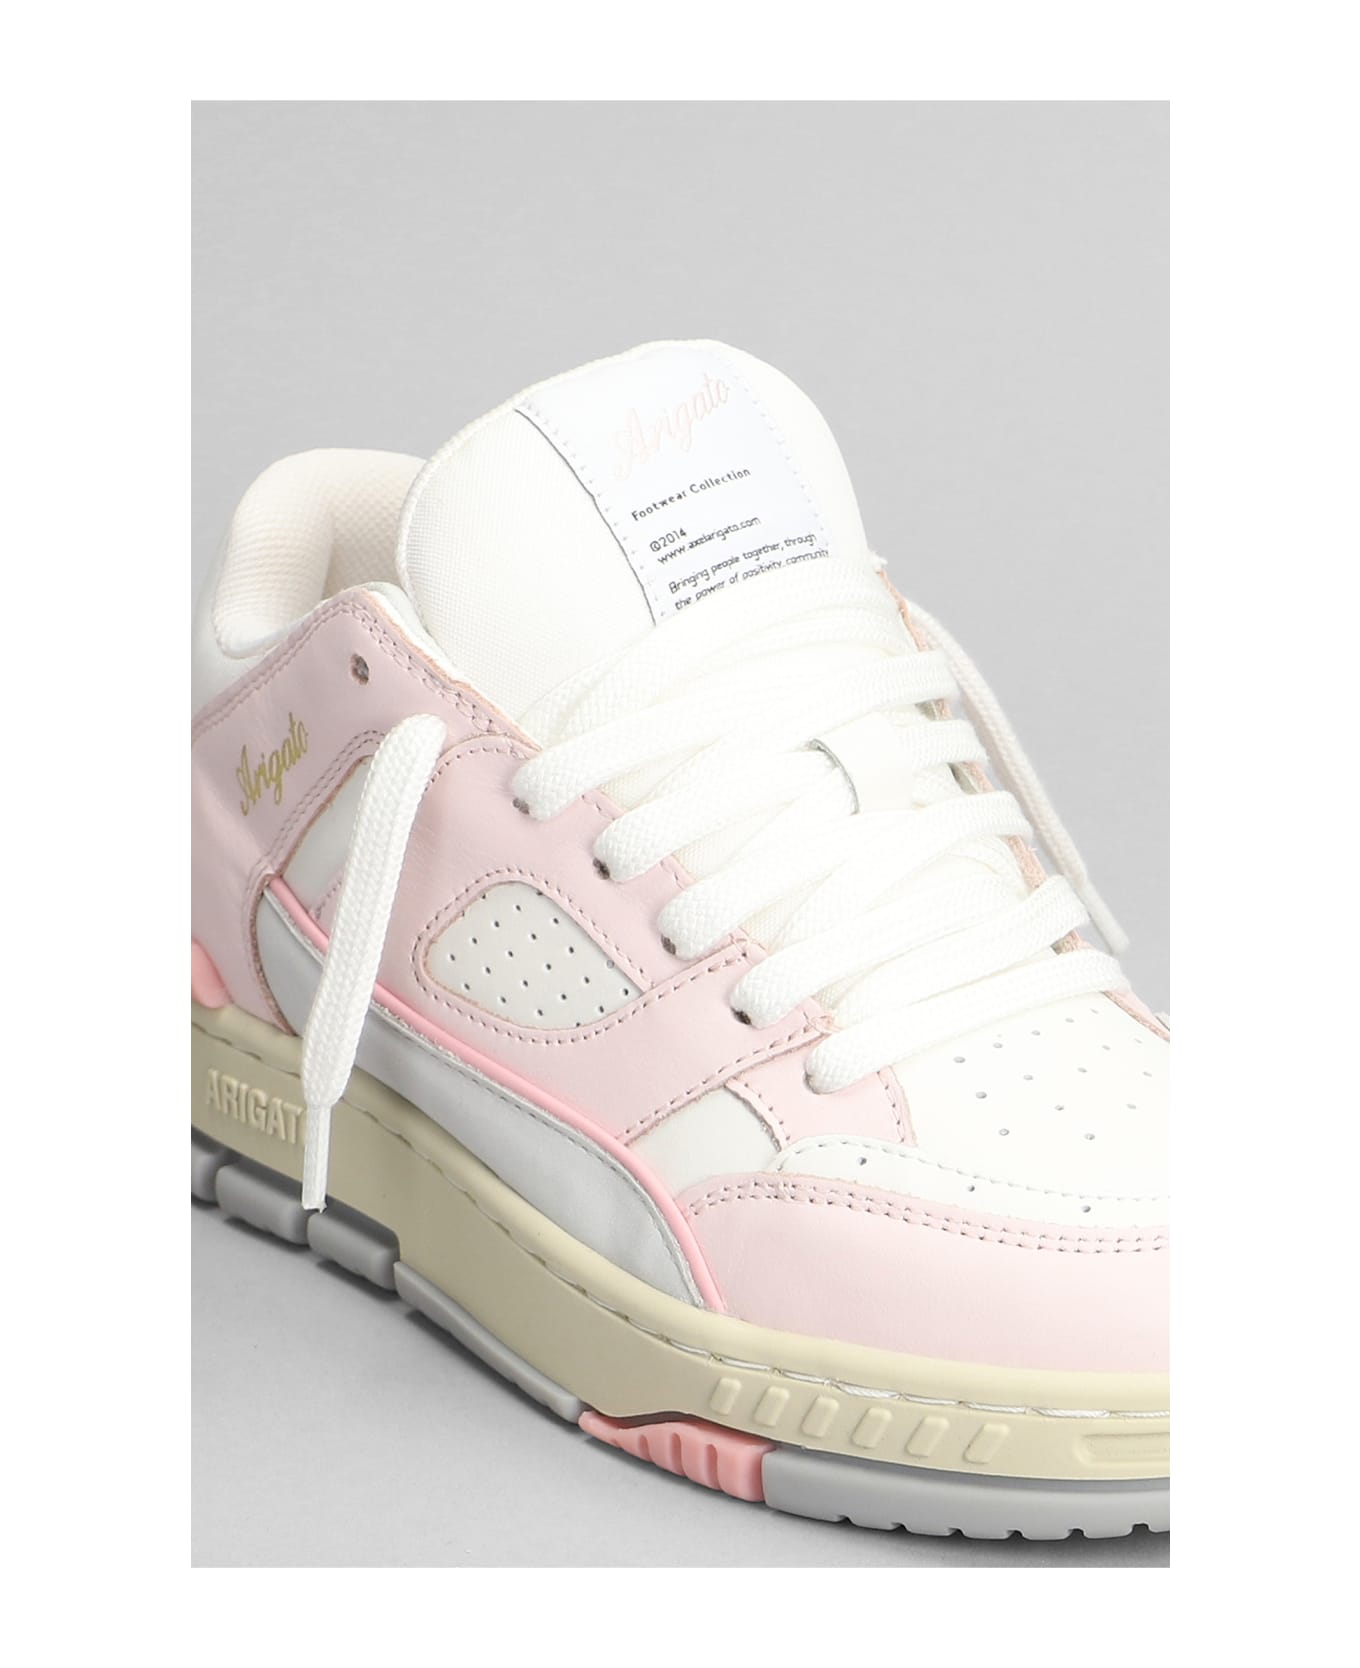 Axel Arigato Area Lo Sneaker Sneakers In Rose-pink Leather - rose-pink スニーカー